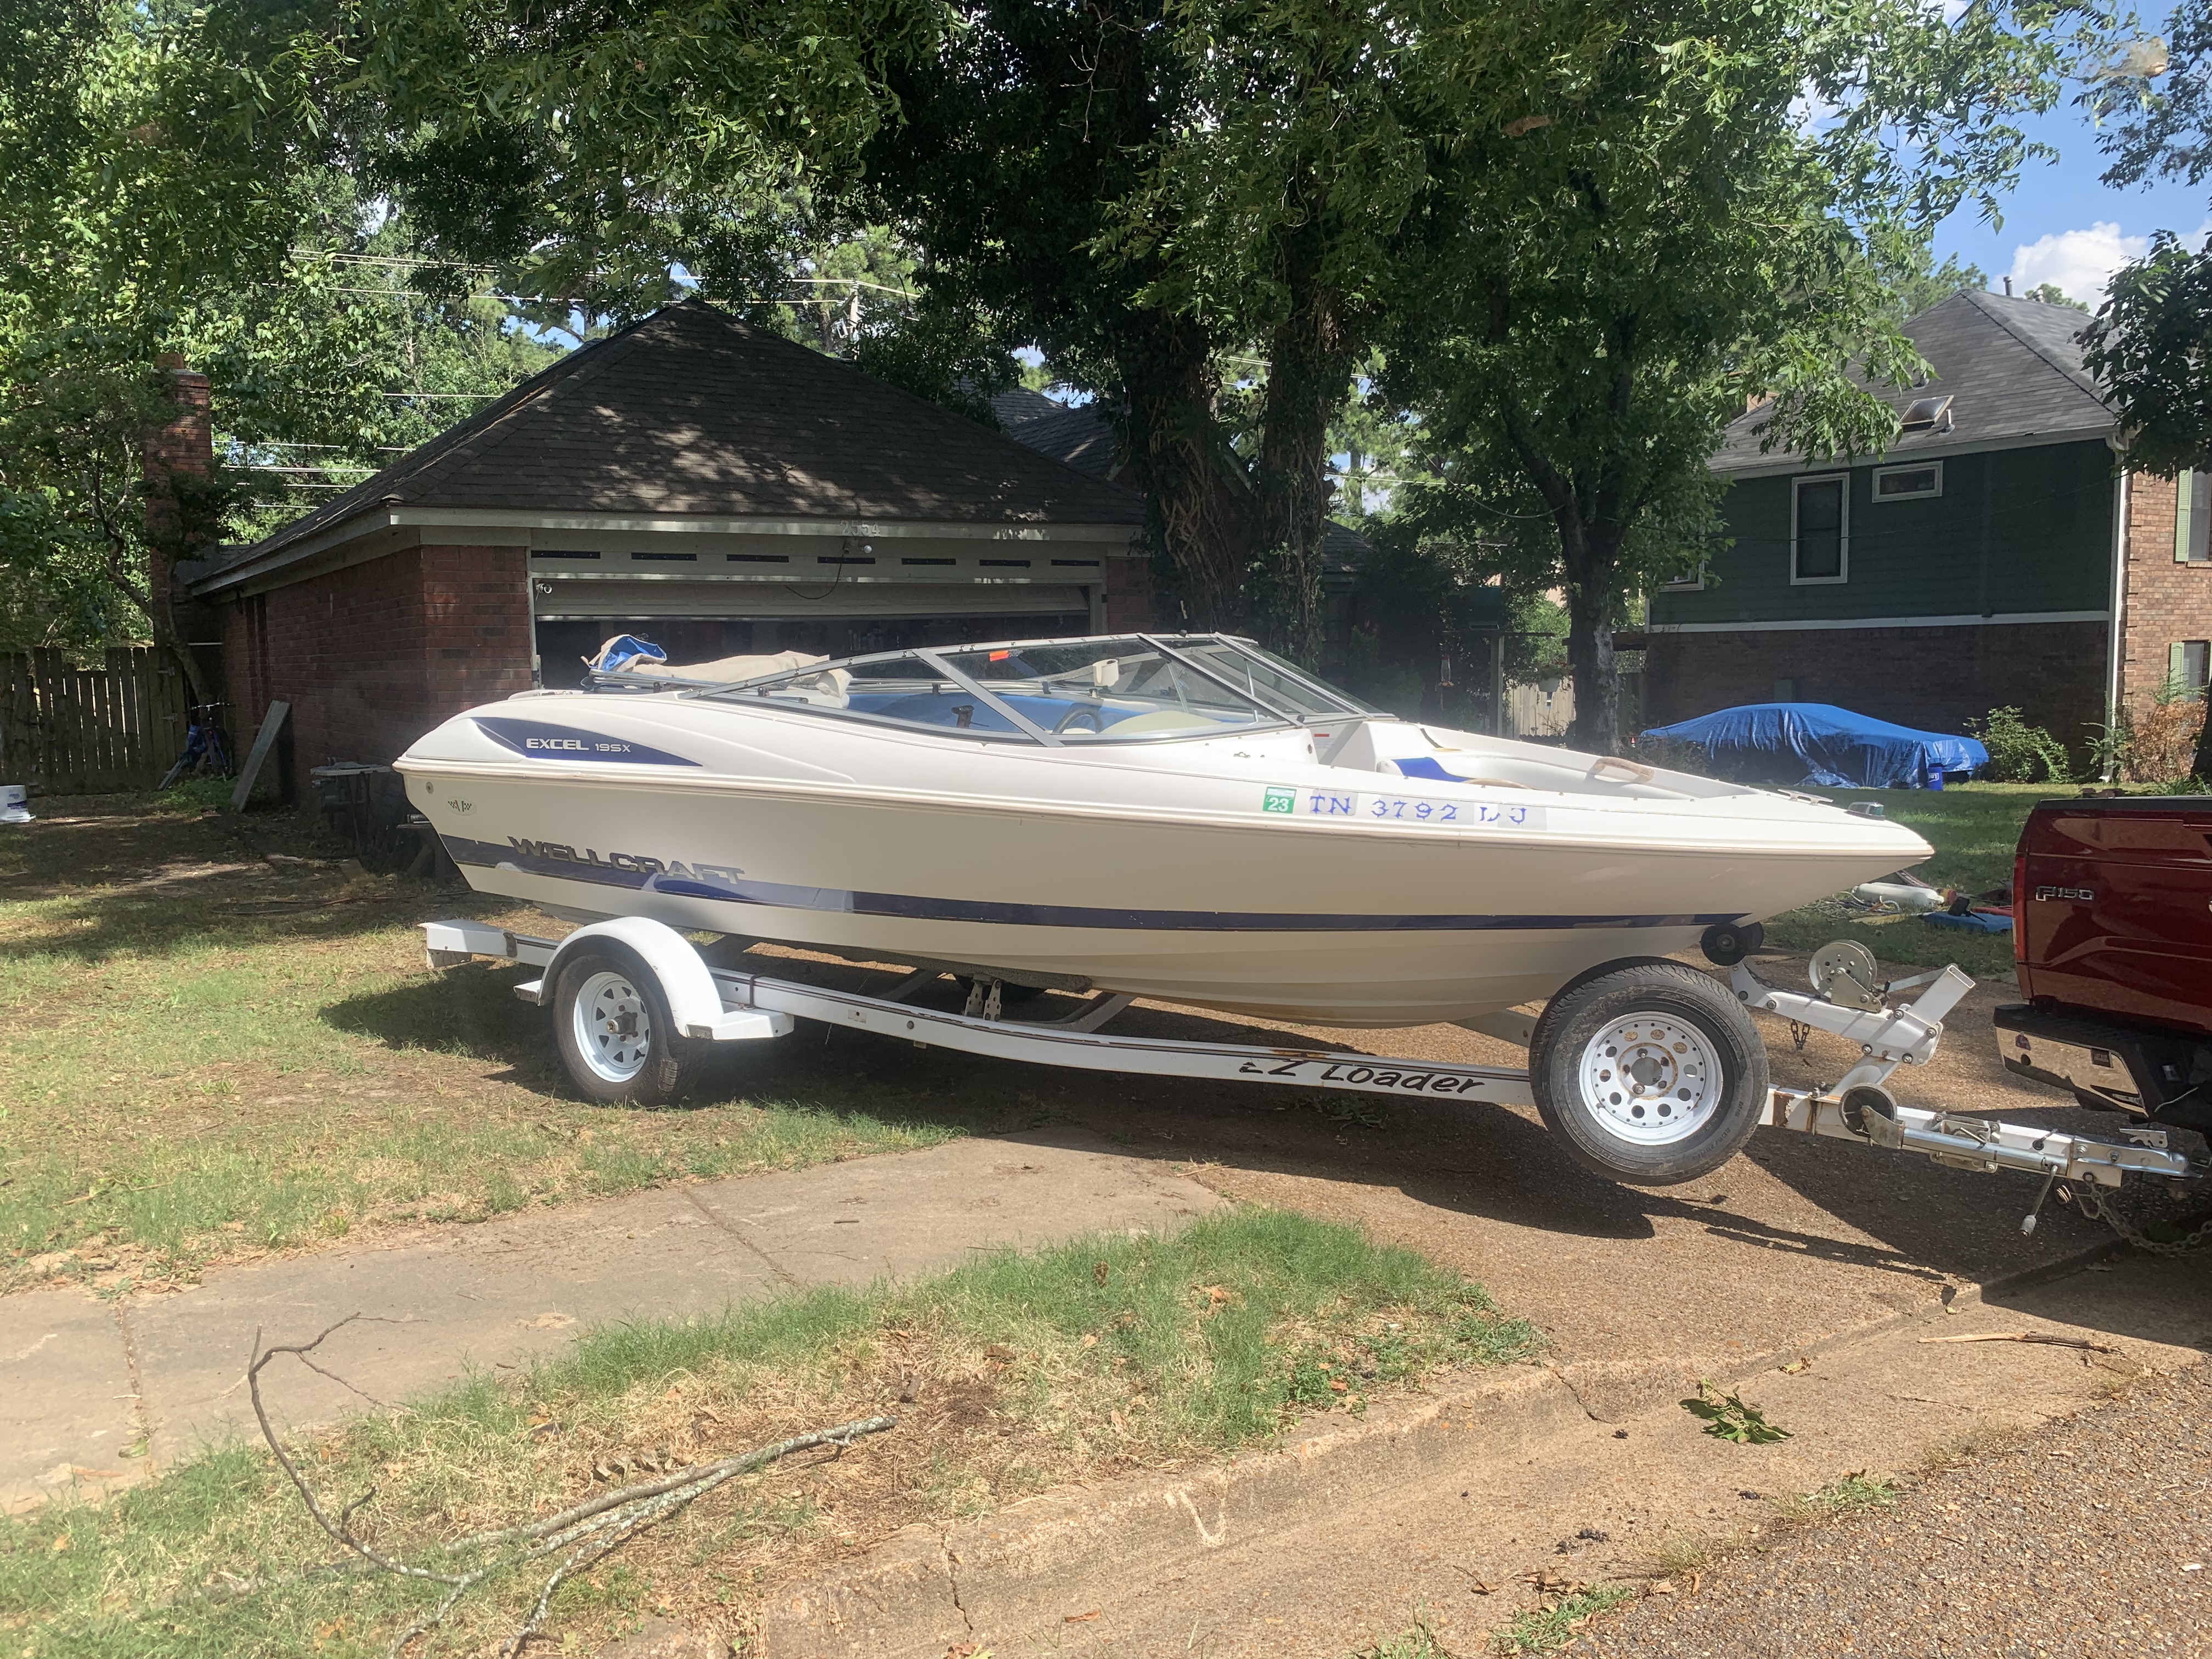 1996 Wellcraft Excel 19sx  Power boat for sale in Bartlett, TN - image 12 